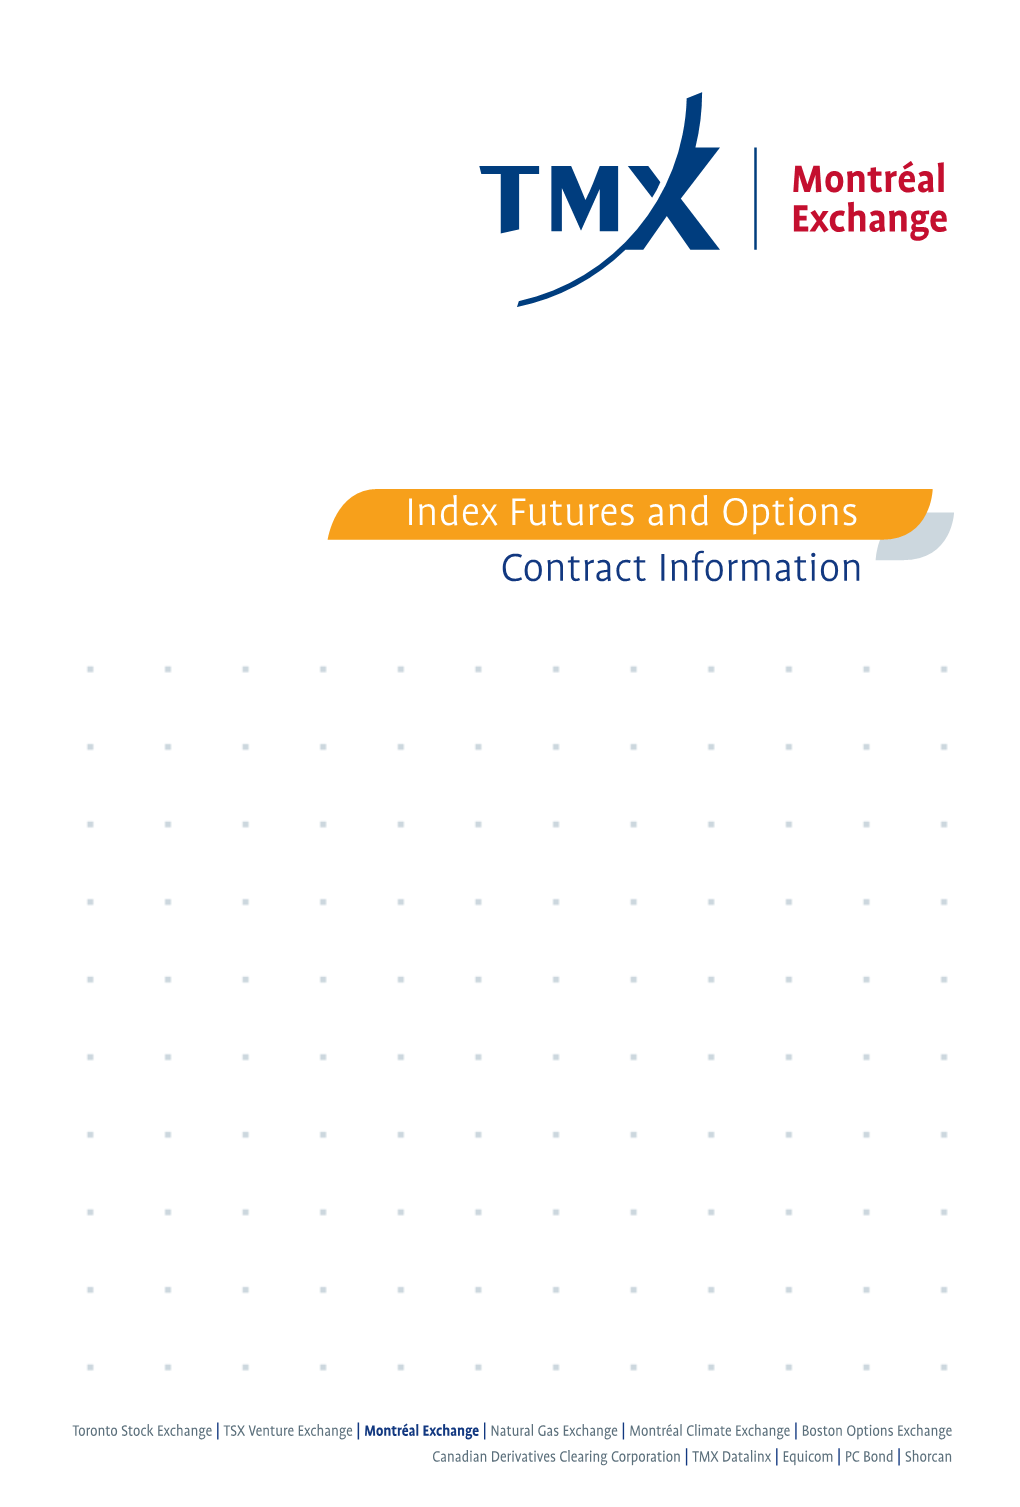 Futures and Options Contract Information